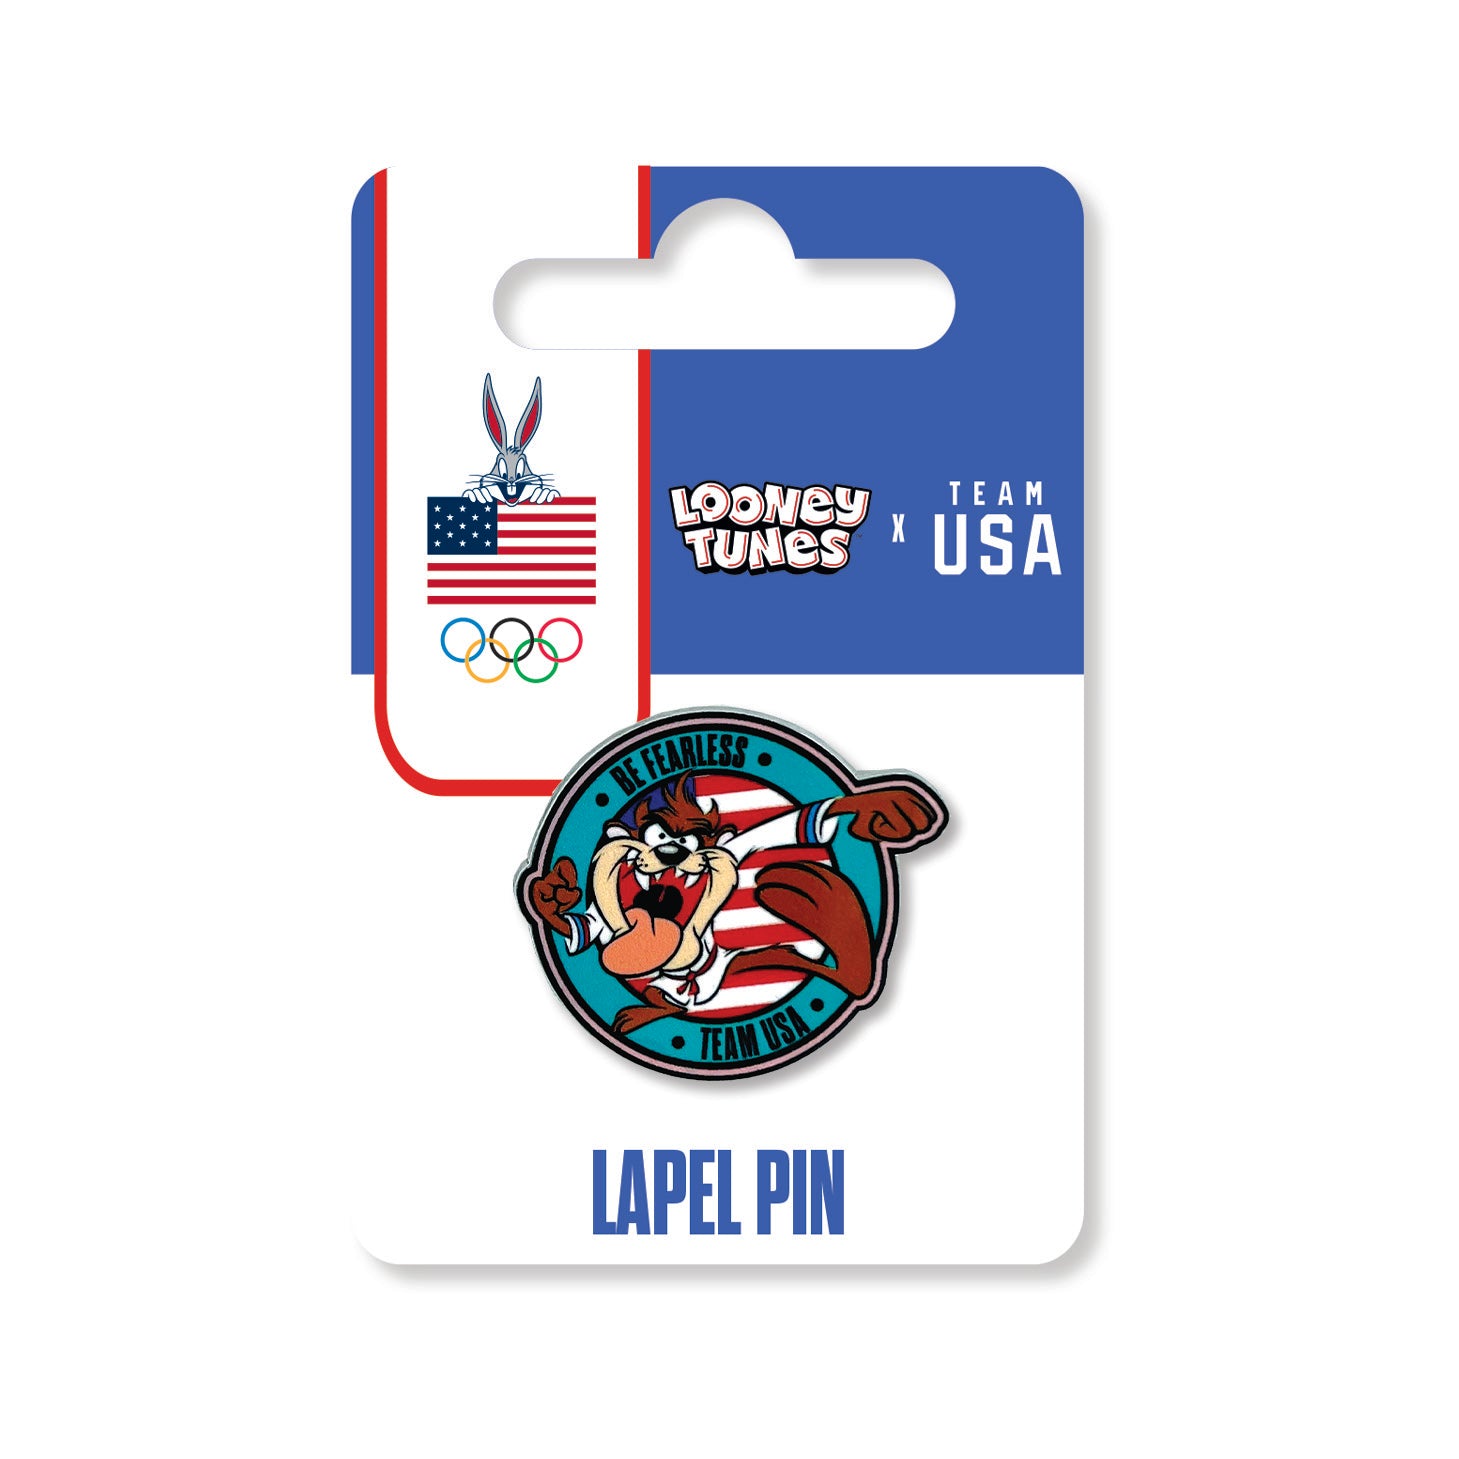 Looney Tunes TEAM USA Taz "Be Fearless" Lapel Pin